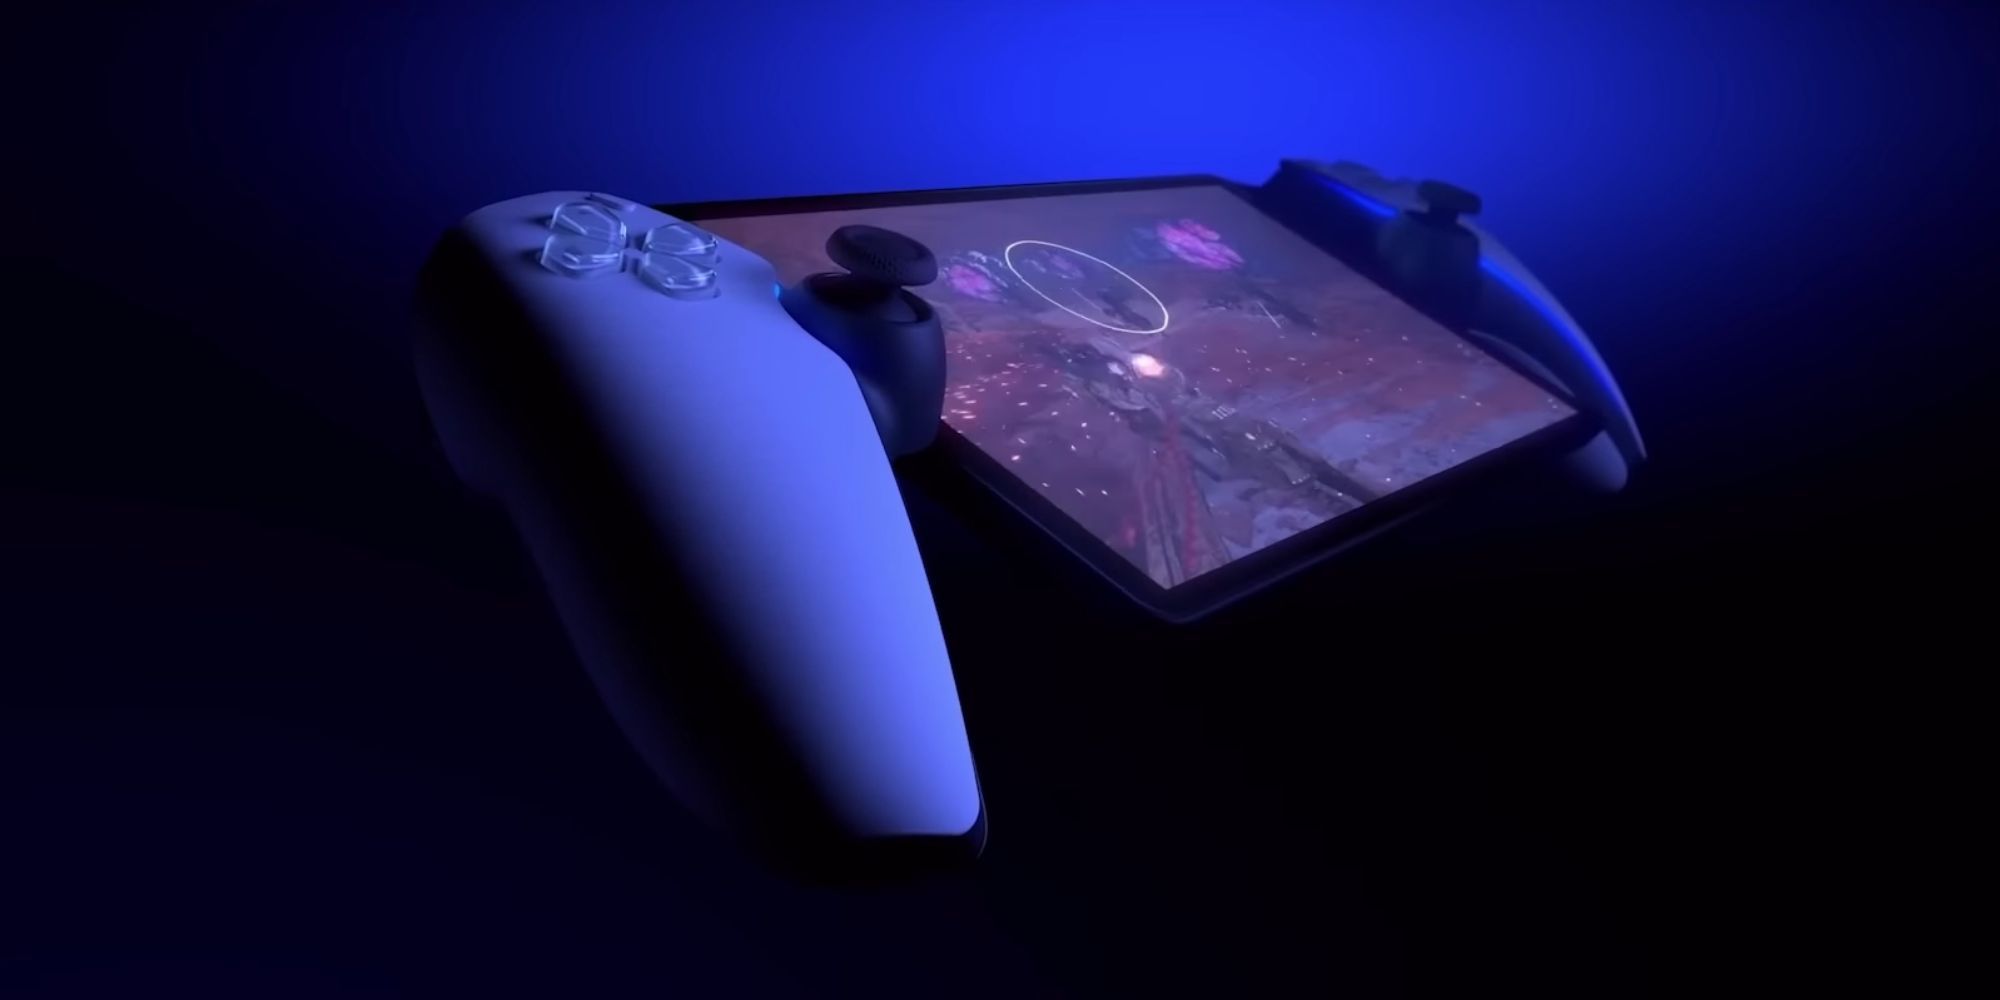 PlayStation's Project Q Handheld Reportedly Has A 3-4 Hour Battery Life